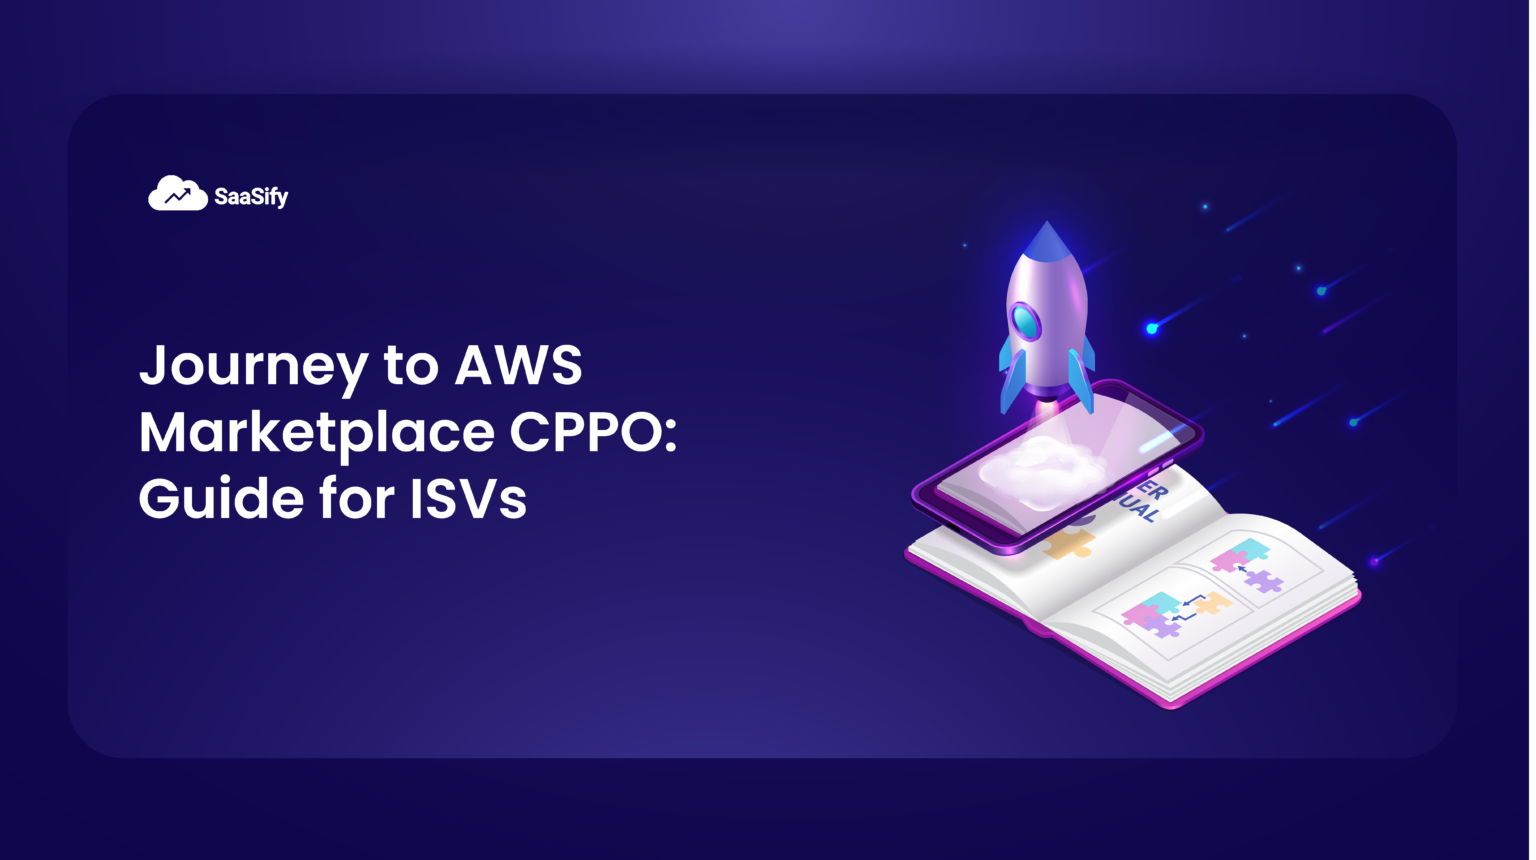 Journey to AWS Marketplace CPPO: 7 essential steps for ISVs